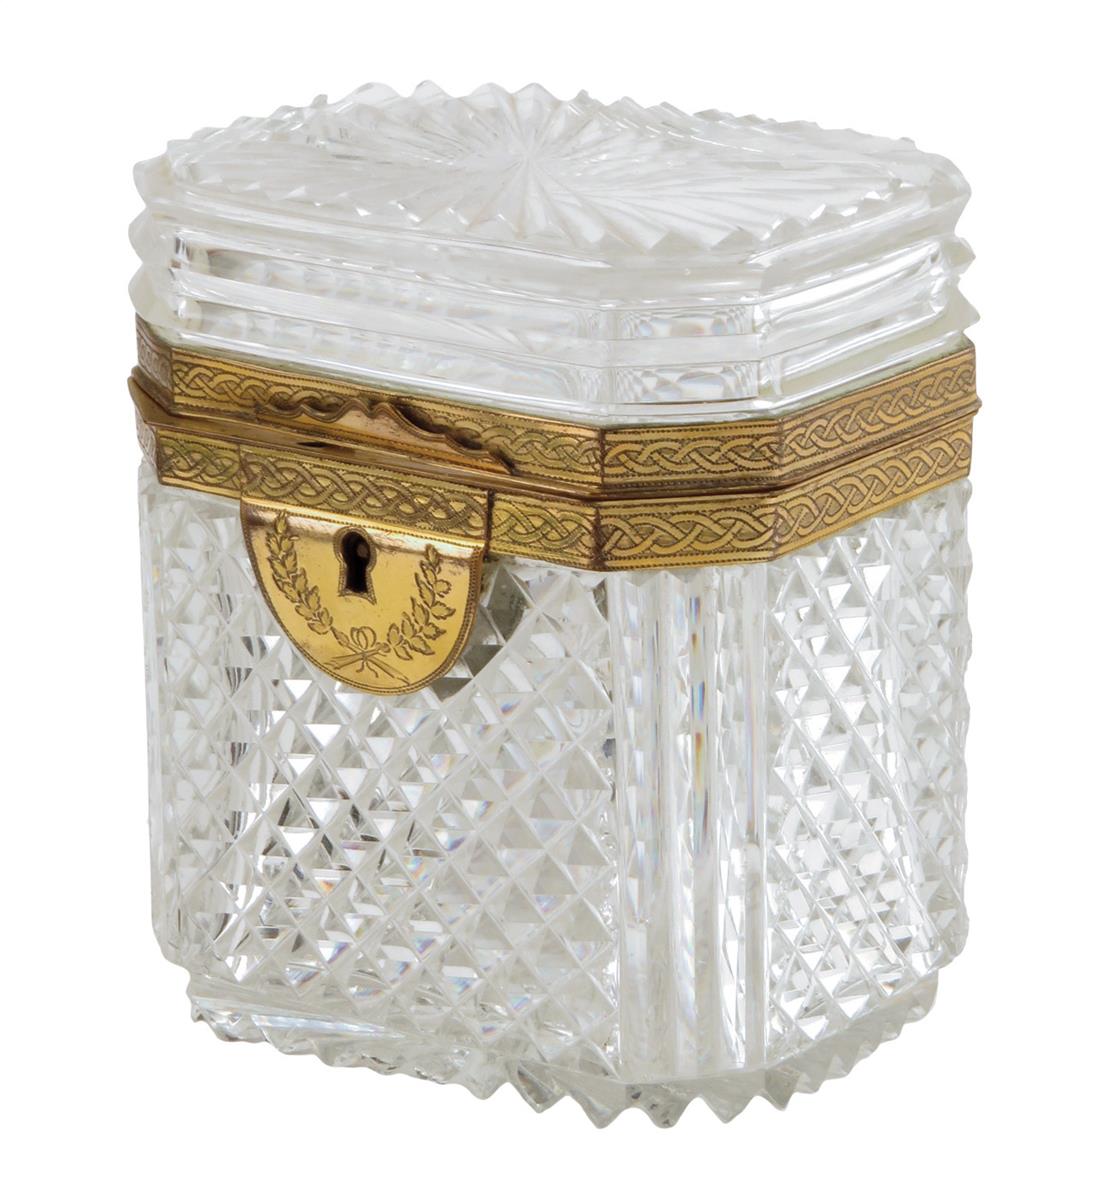 A French cut glass and gilt metal mounted casket, late 19th / early 20th century, 12.5cm high, 11.